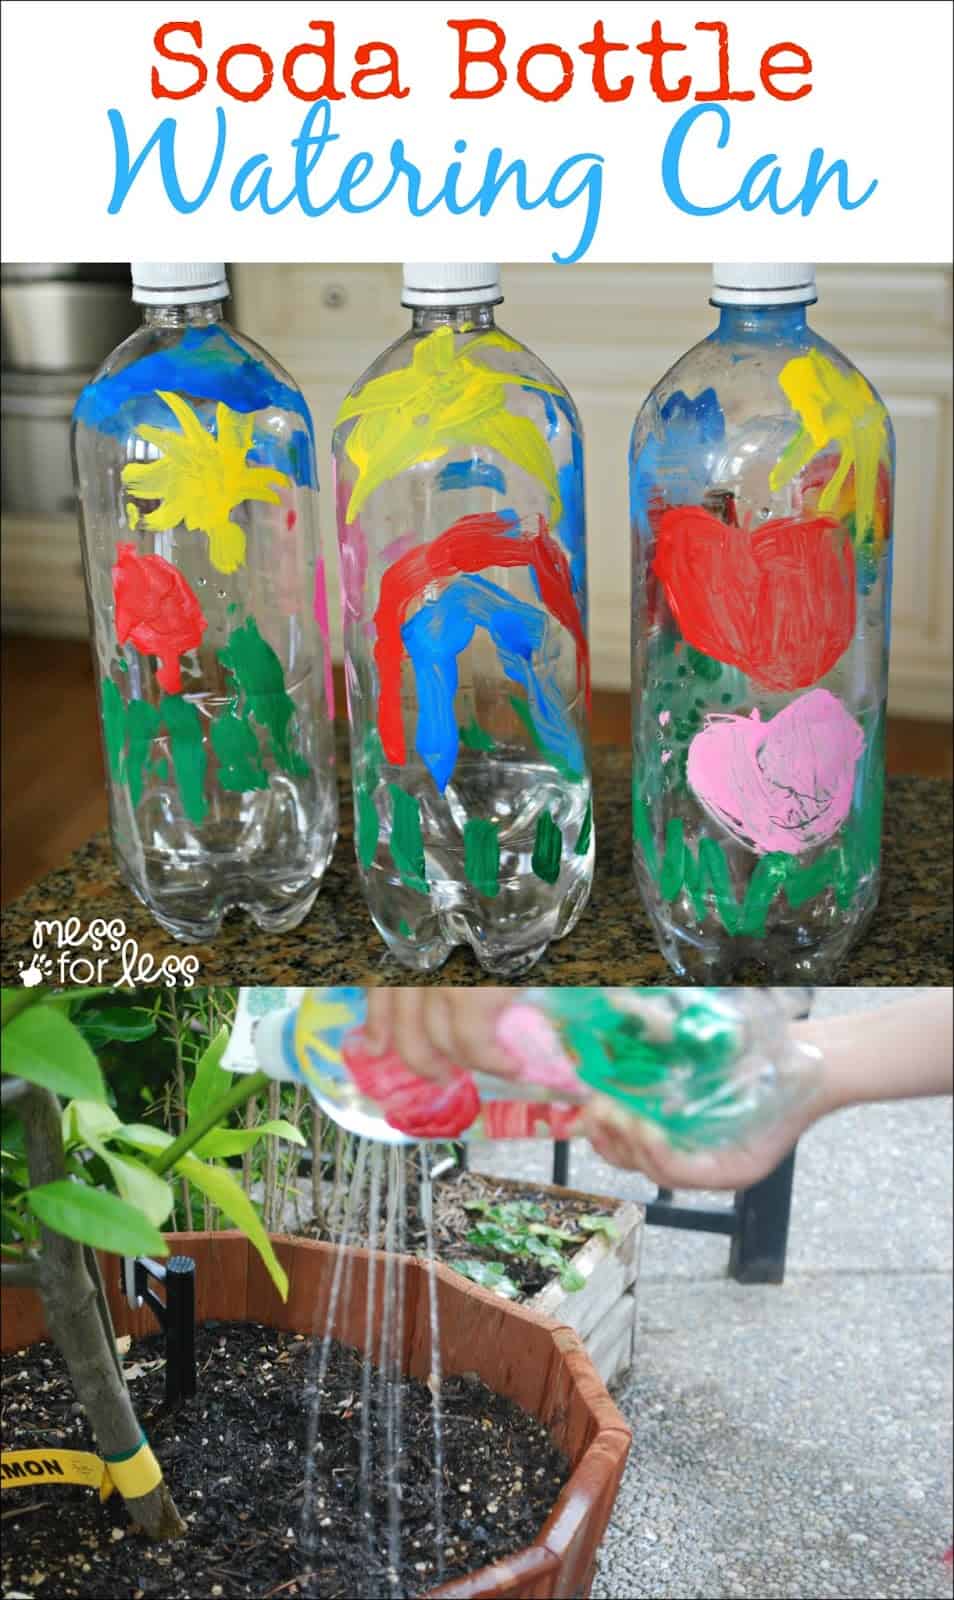 Learn how kids (with a little adult help) can create these useful soda bottle watering cans.